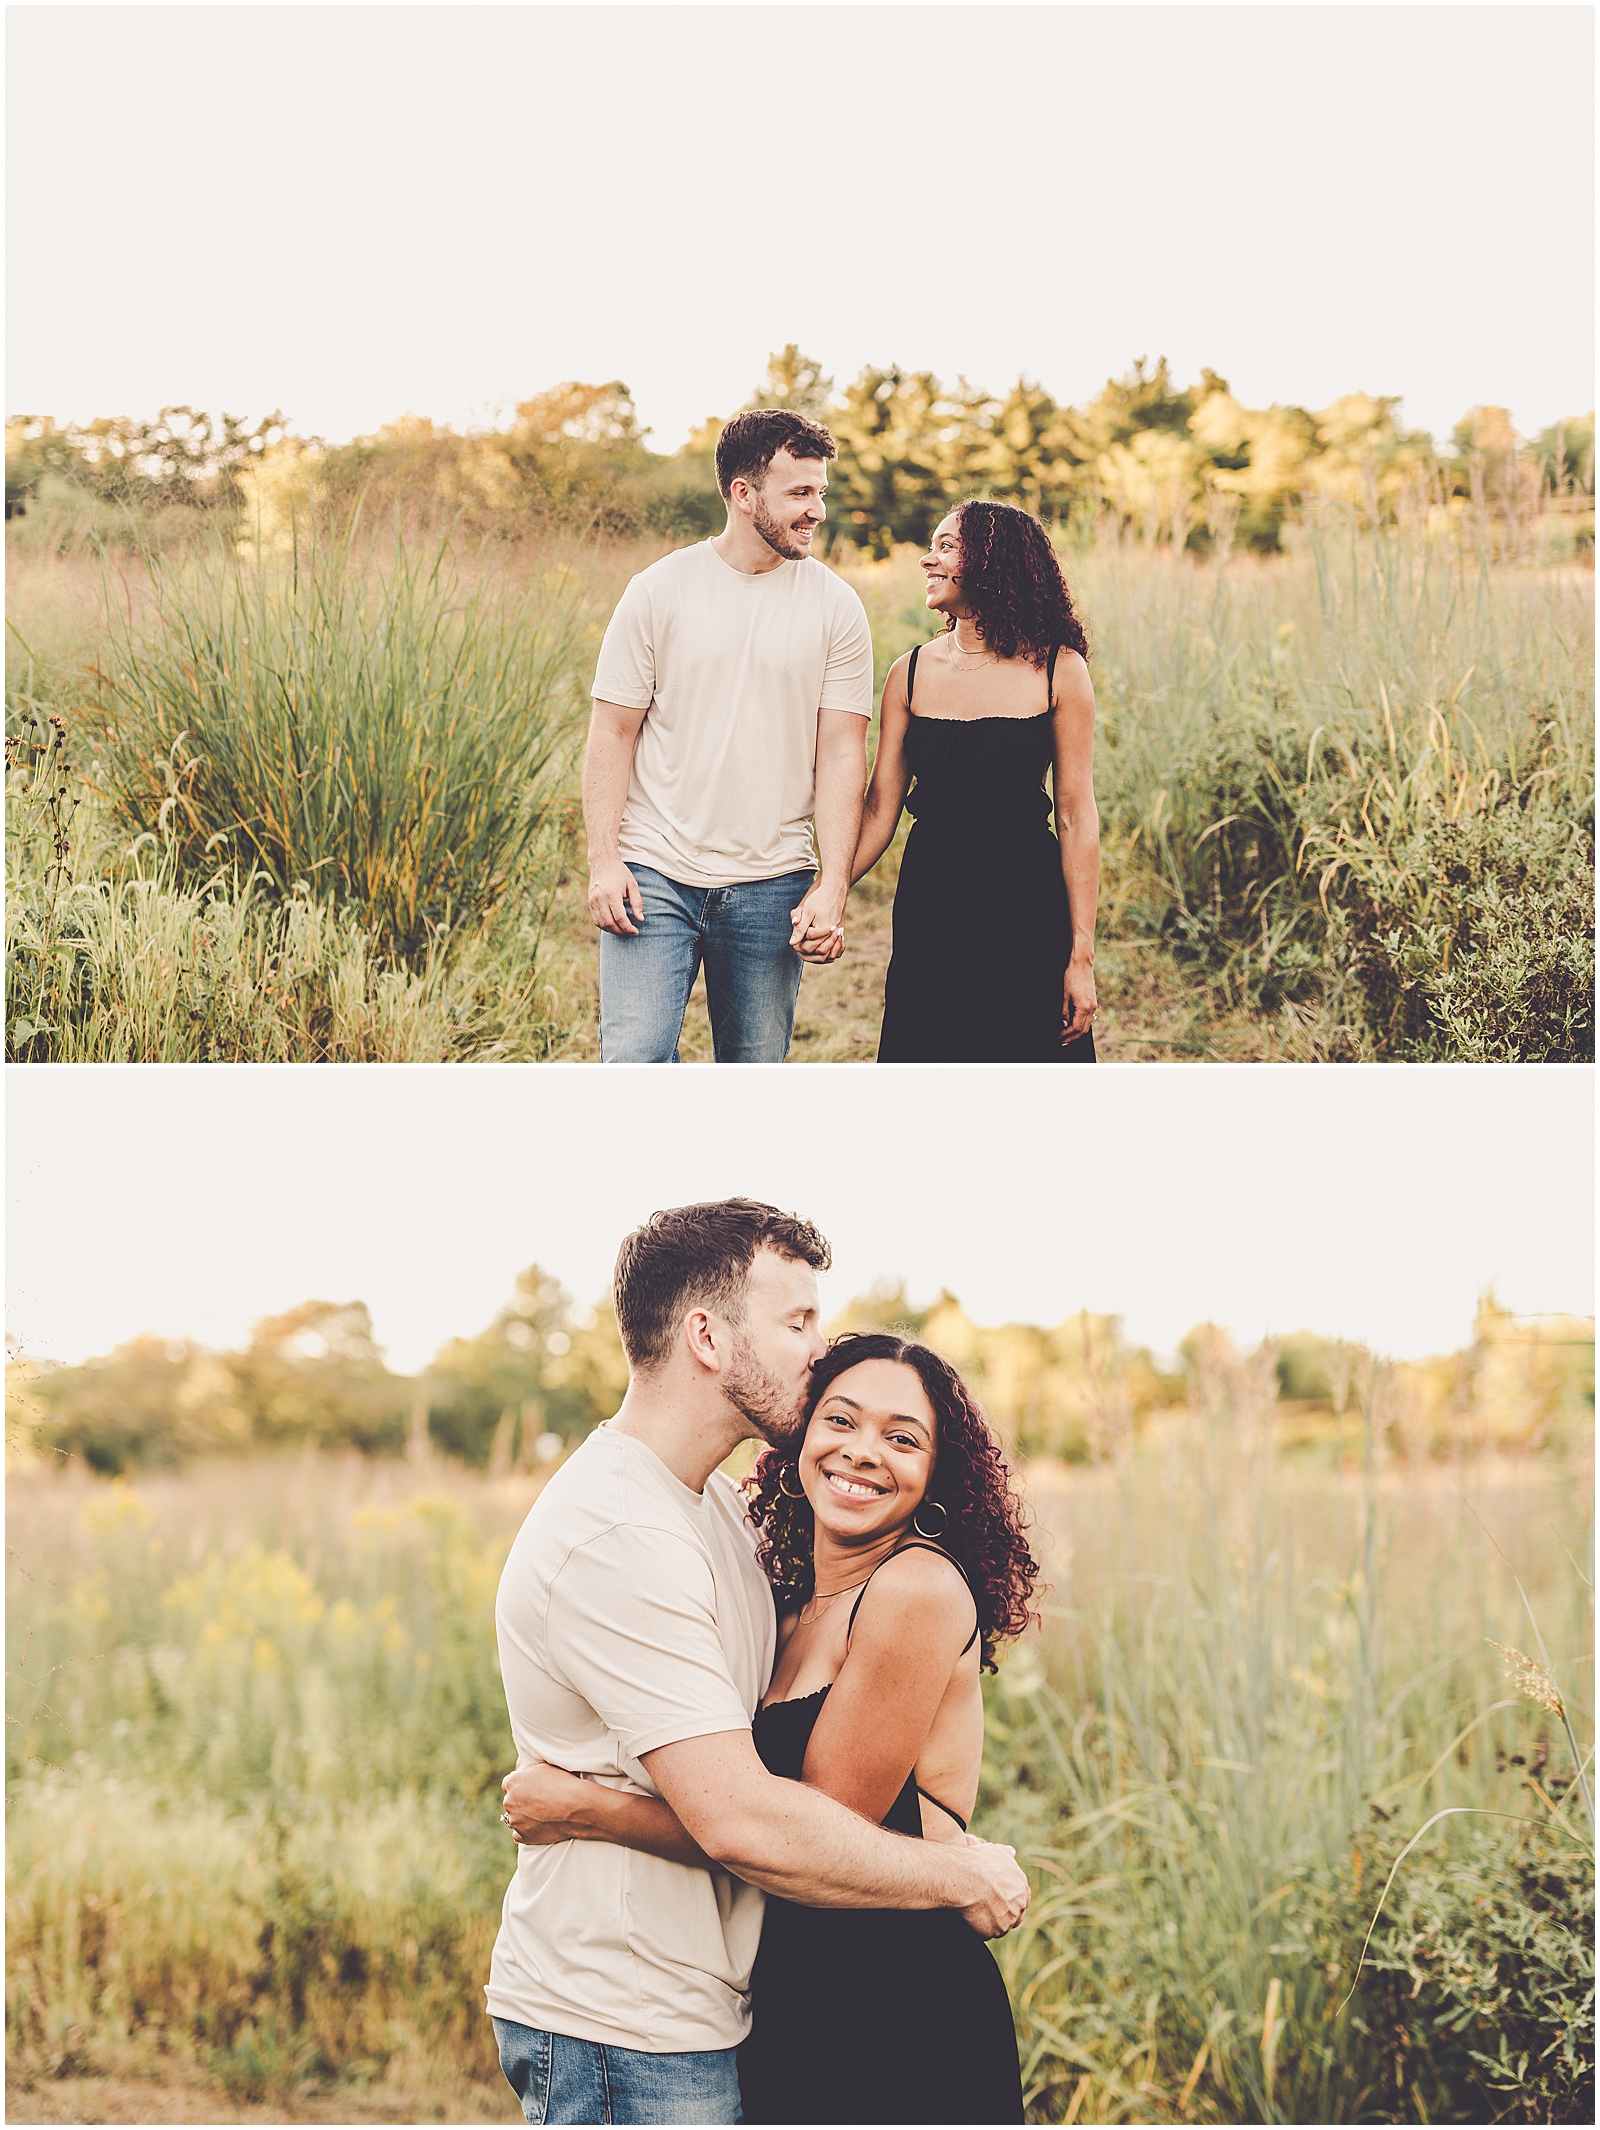 Autumn & Michael's anniversary session at the Kankakee River State Park with Chicagoland wedding photographer Kara Evans Photographer.